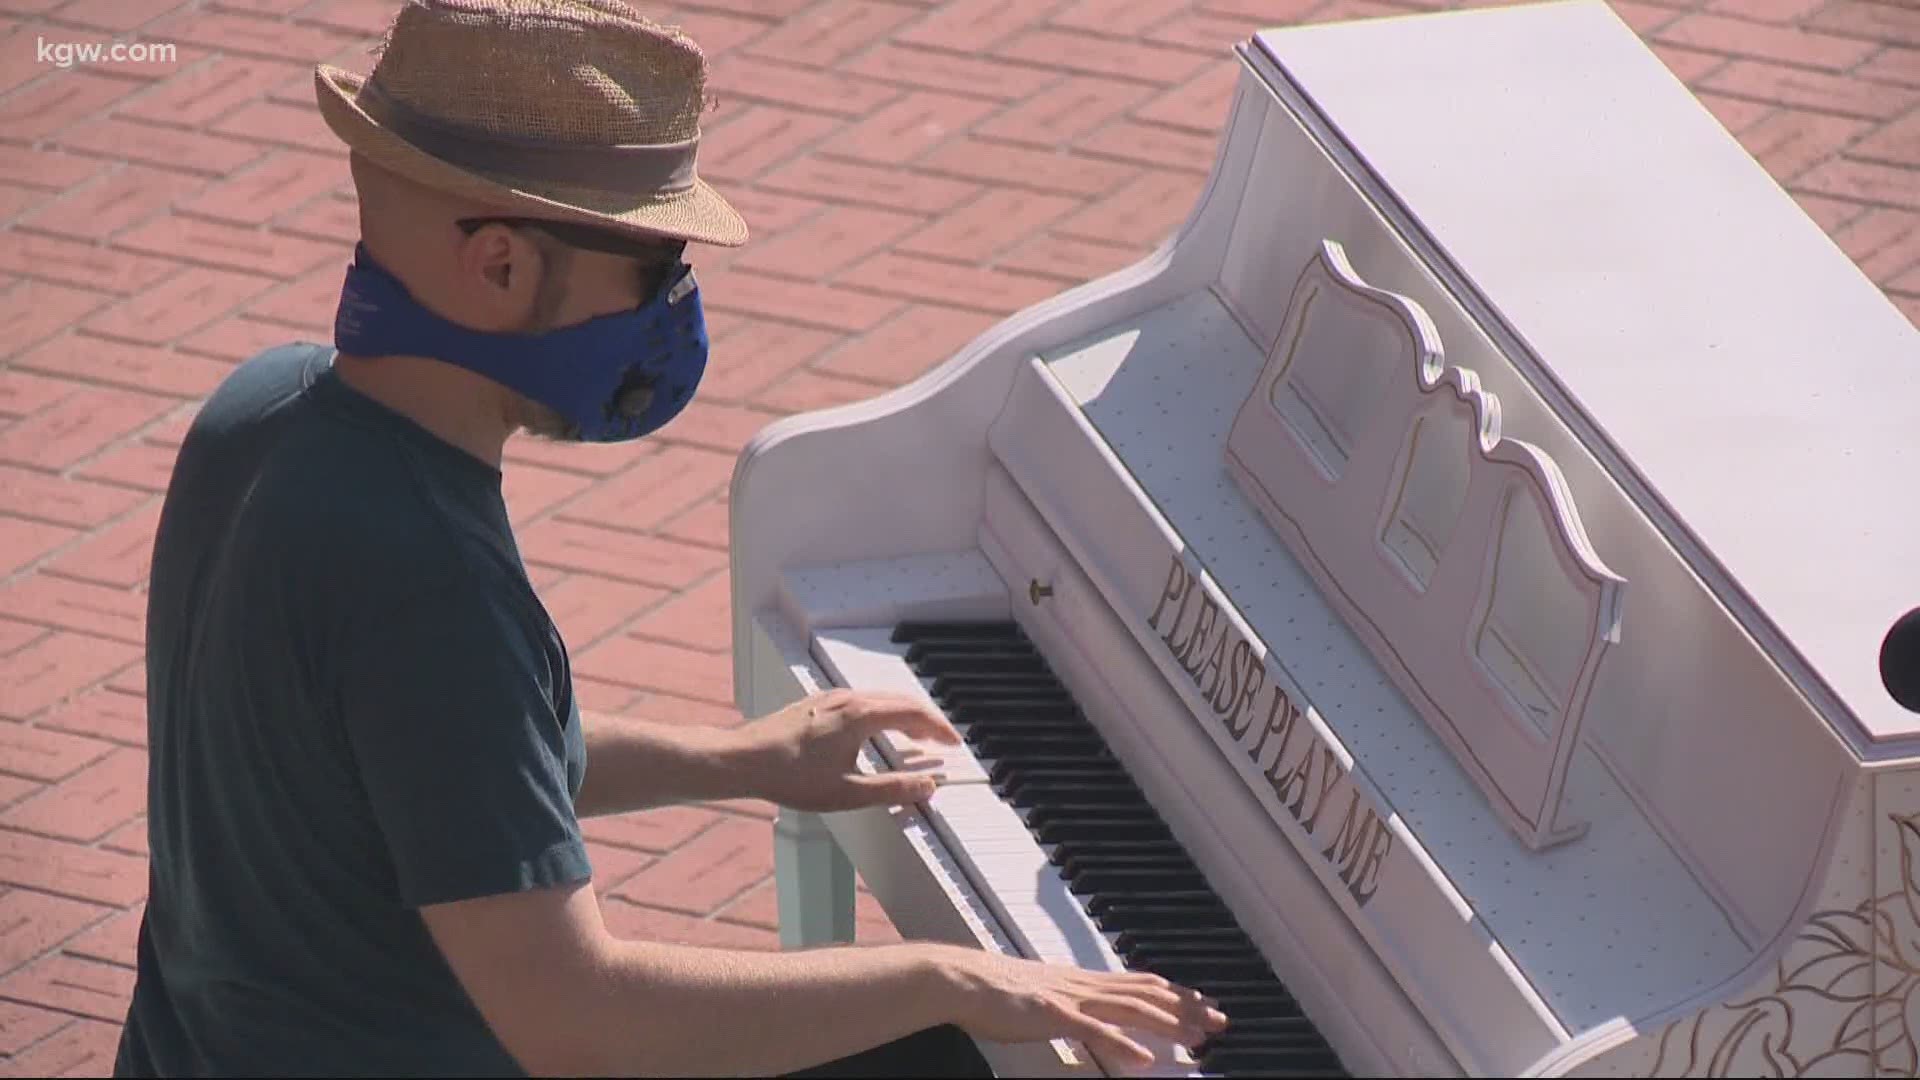 There are 10 pianos around Portland put in place for anyone who wants to play. One is at Pioneer Courthouse Square.